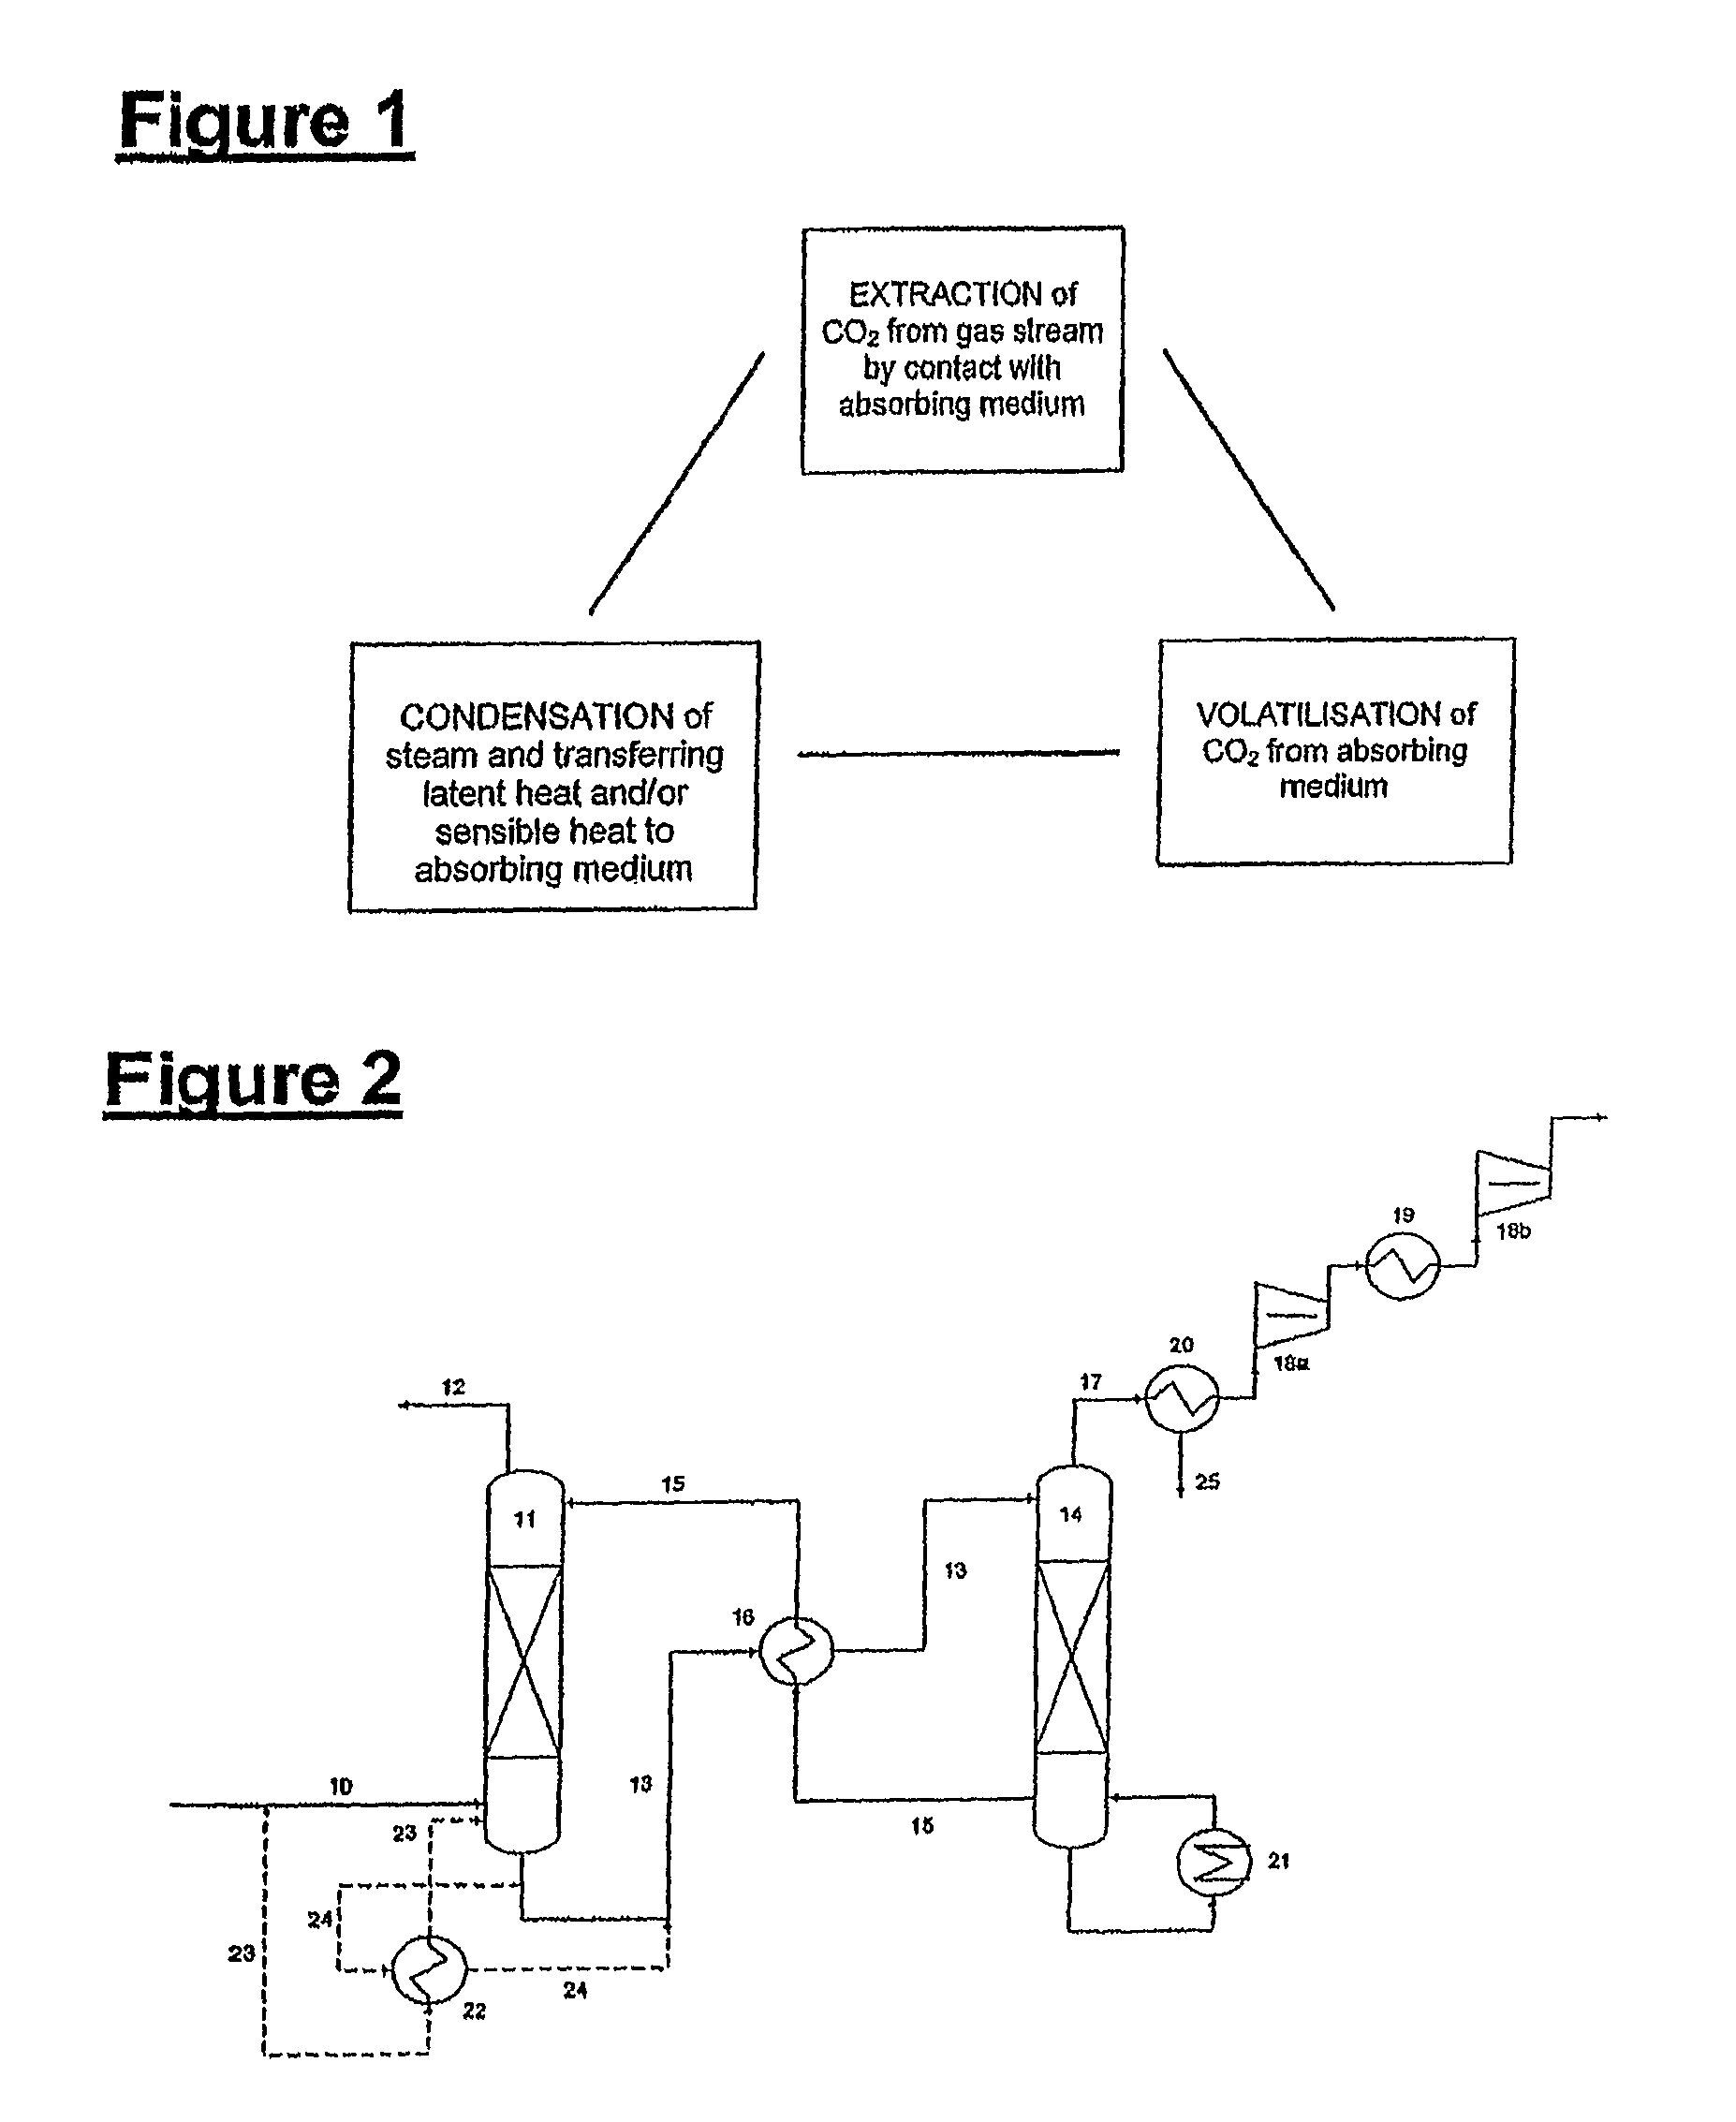 Plant and process for removing carbon dioxide from gas streams